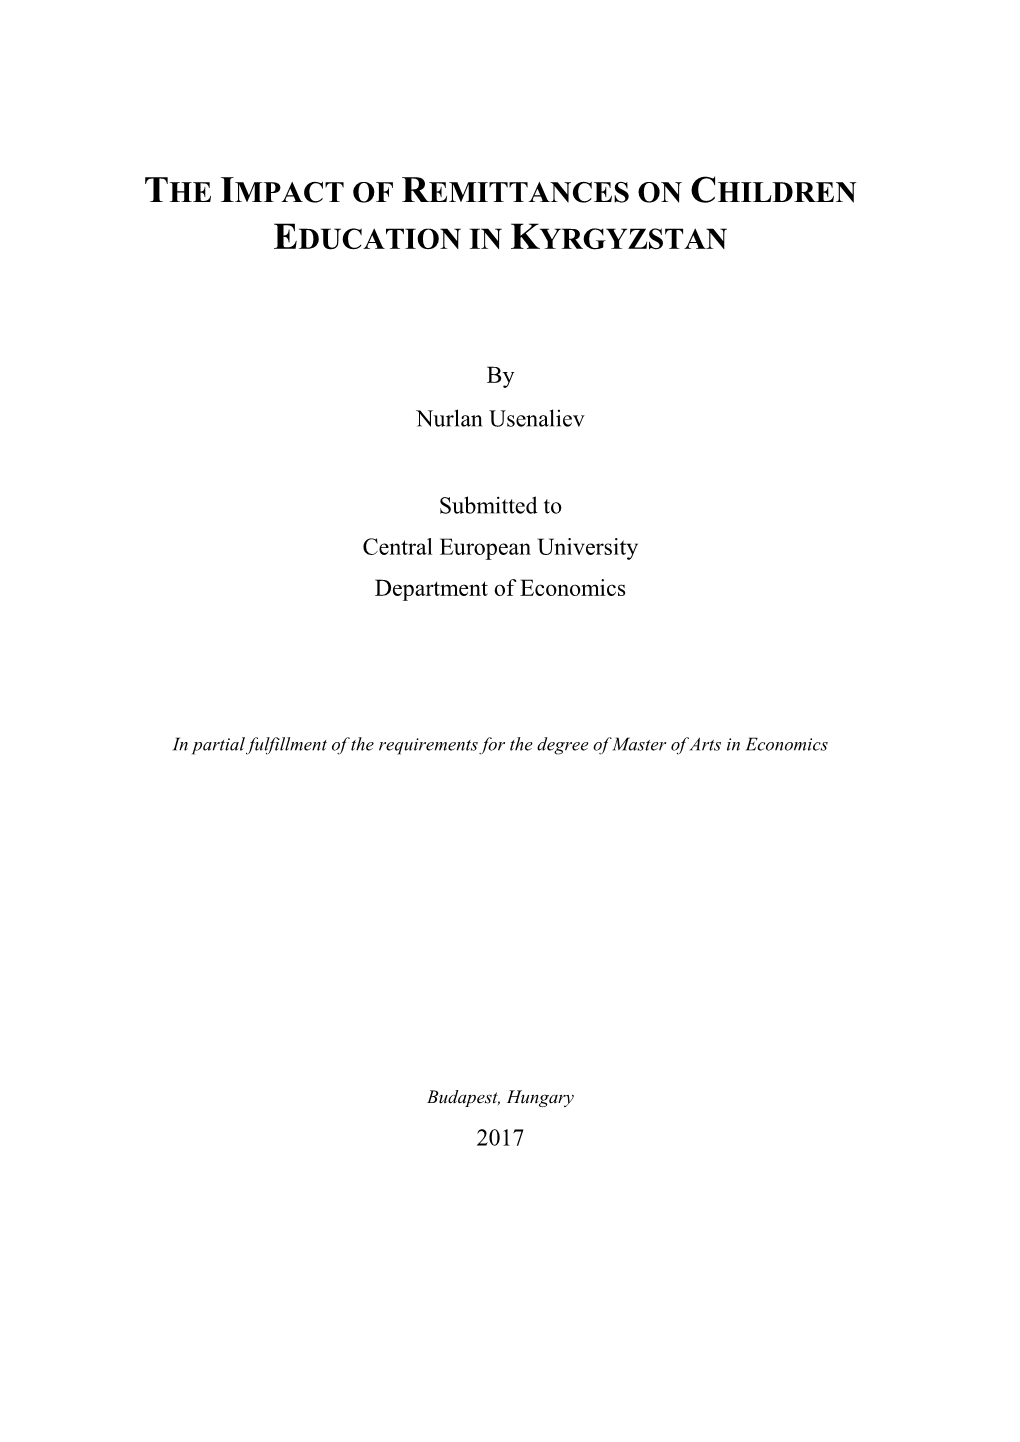 The Impact of Remittances on Children Education in Kyrgyzstan